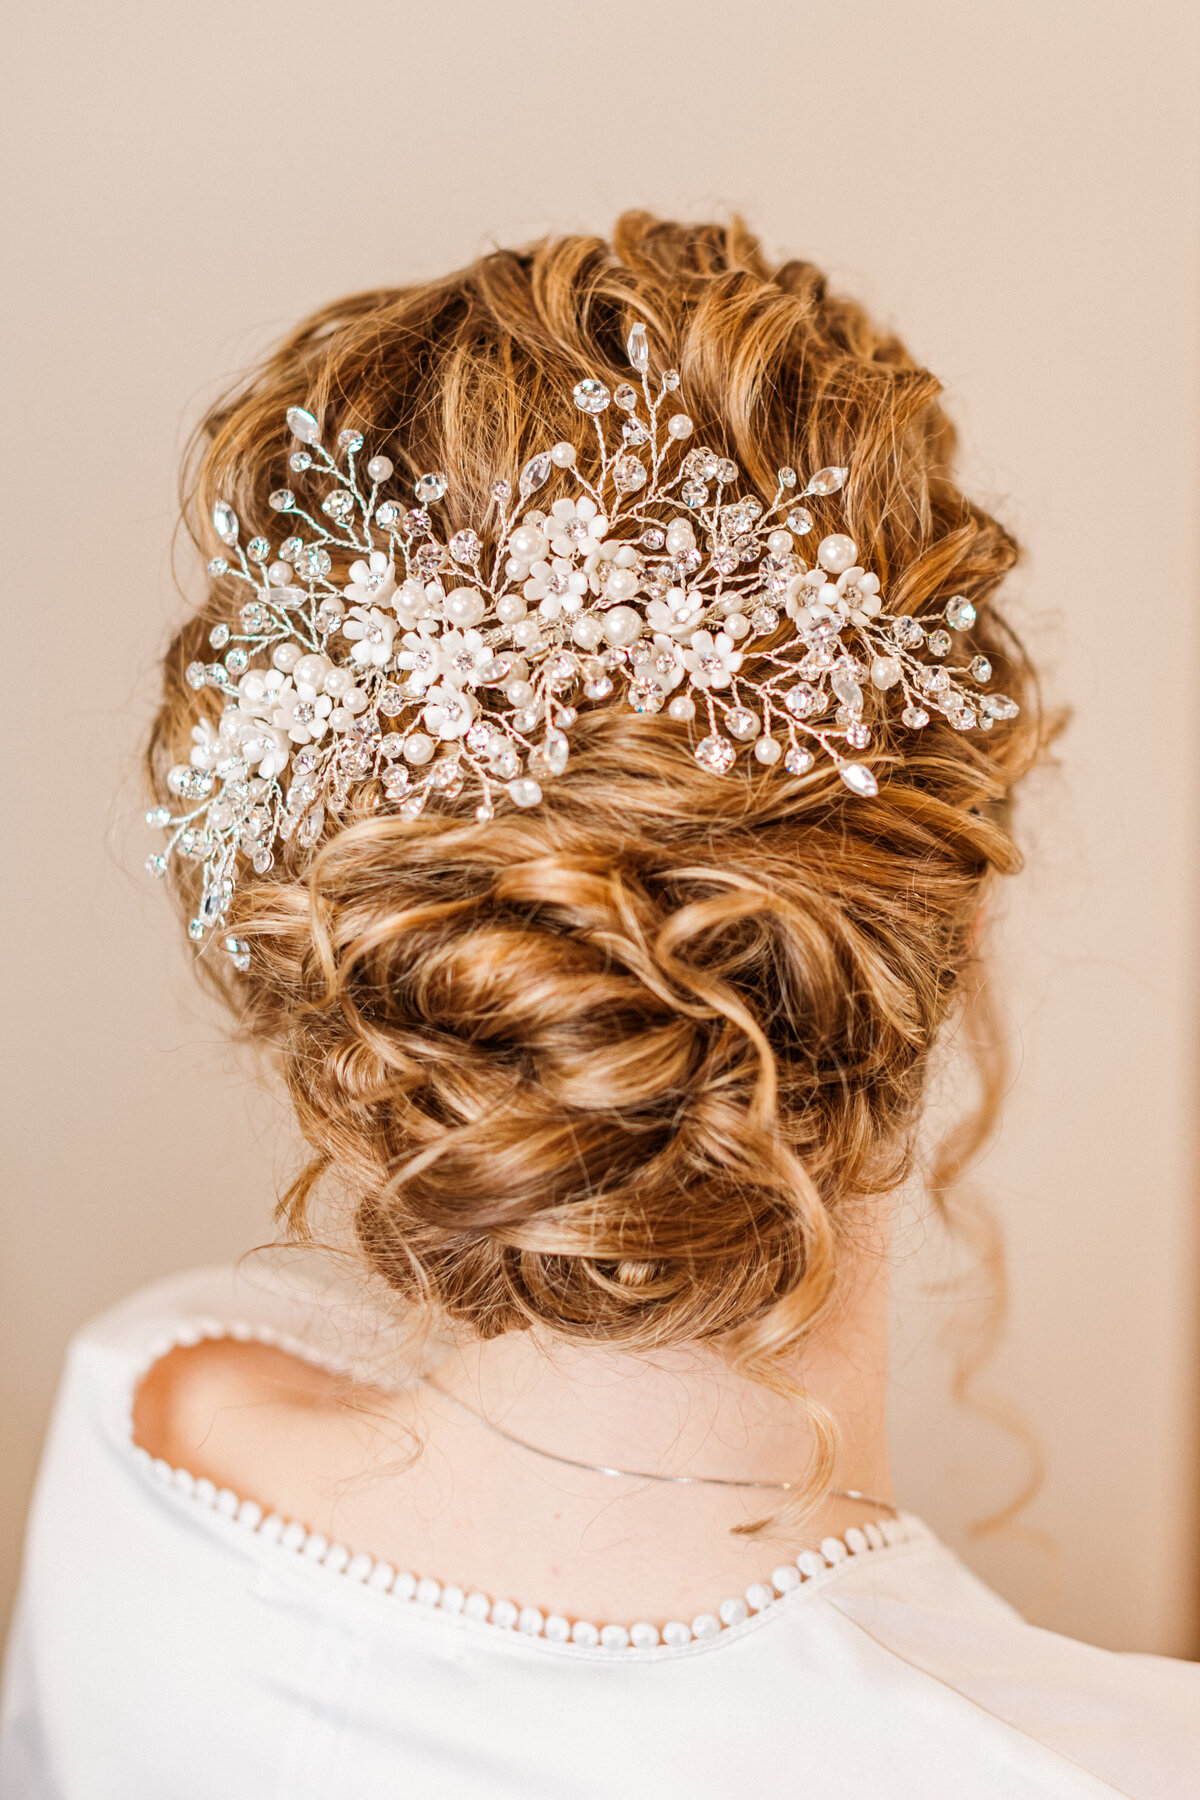 Wedding updo by Kayla Walters Hair and Makeup on site bridal beauty